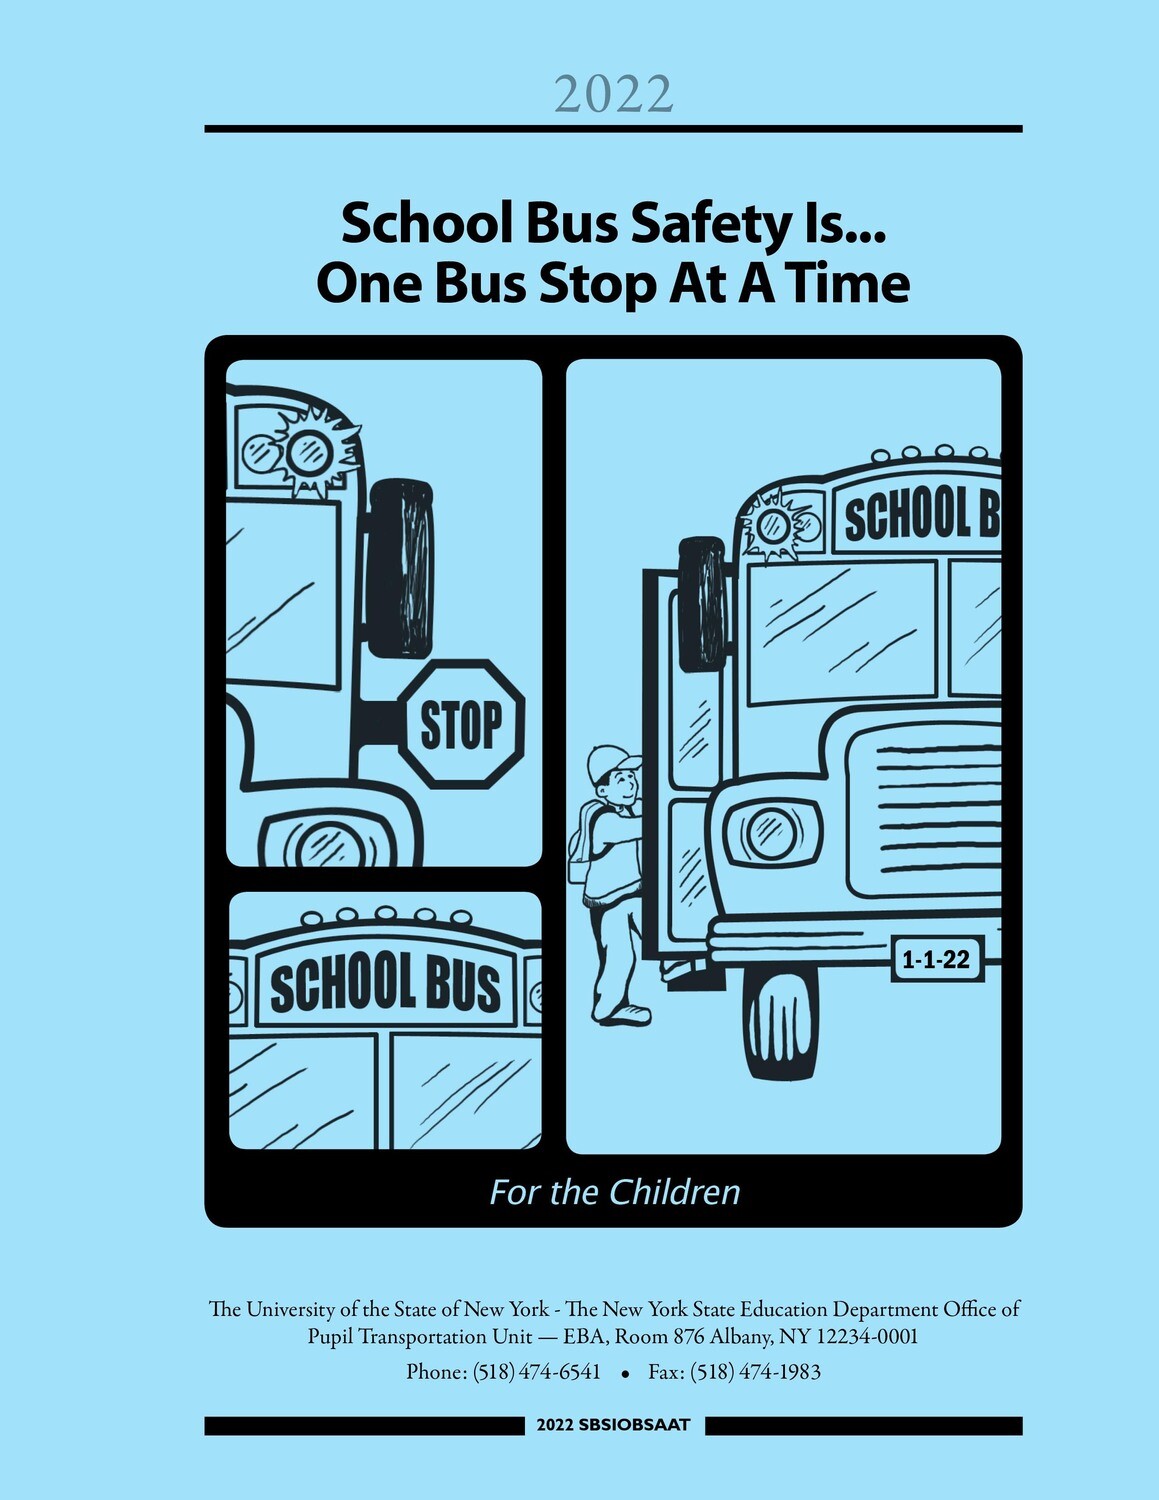 2022 NYS School Bus Safety Is...One Bus Stop At A Time (SBSIOBSAAT)